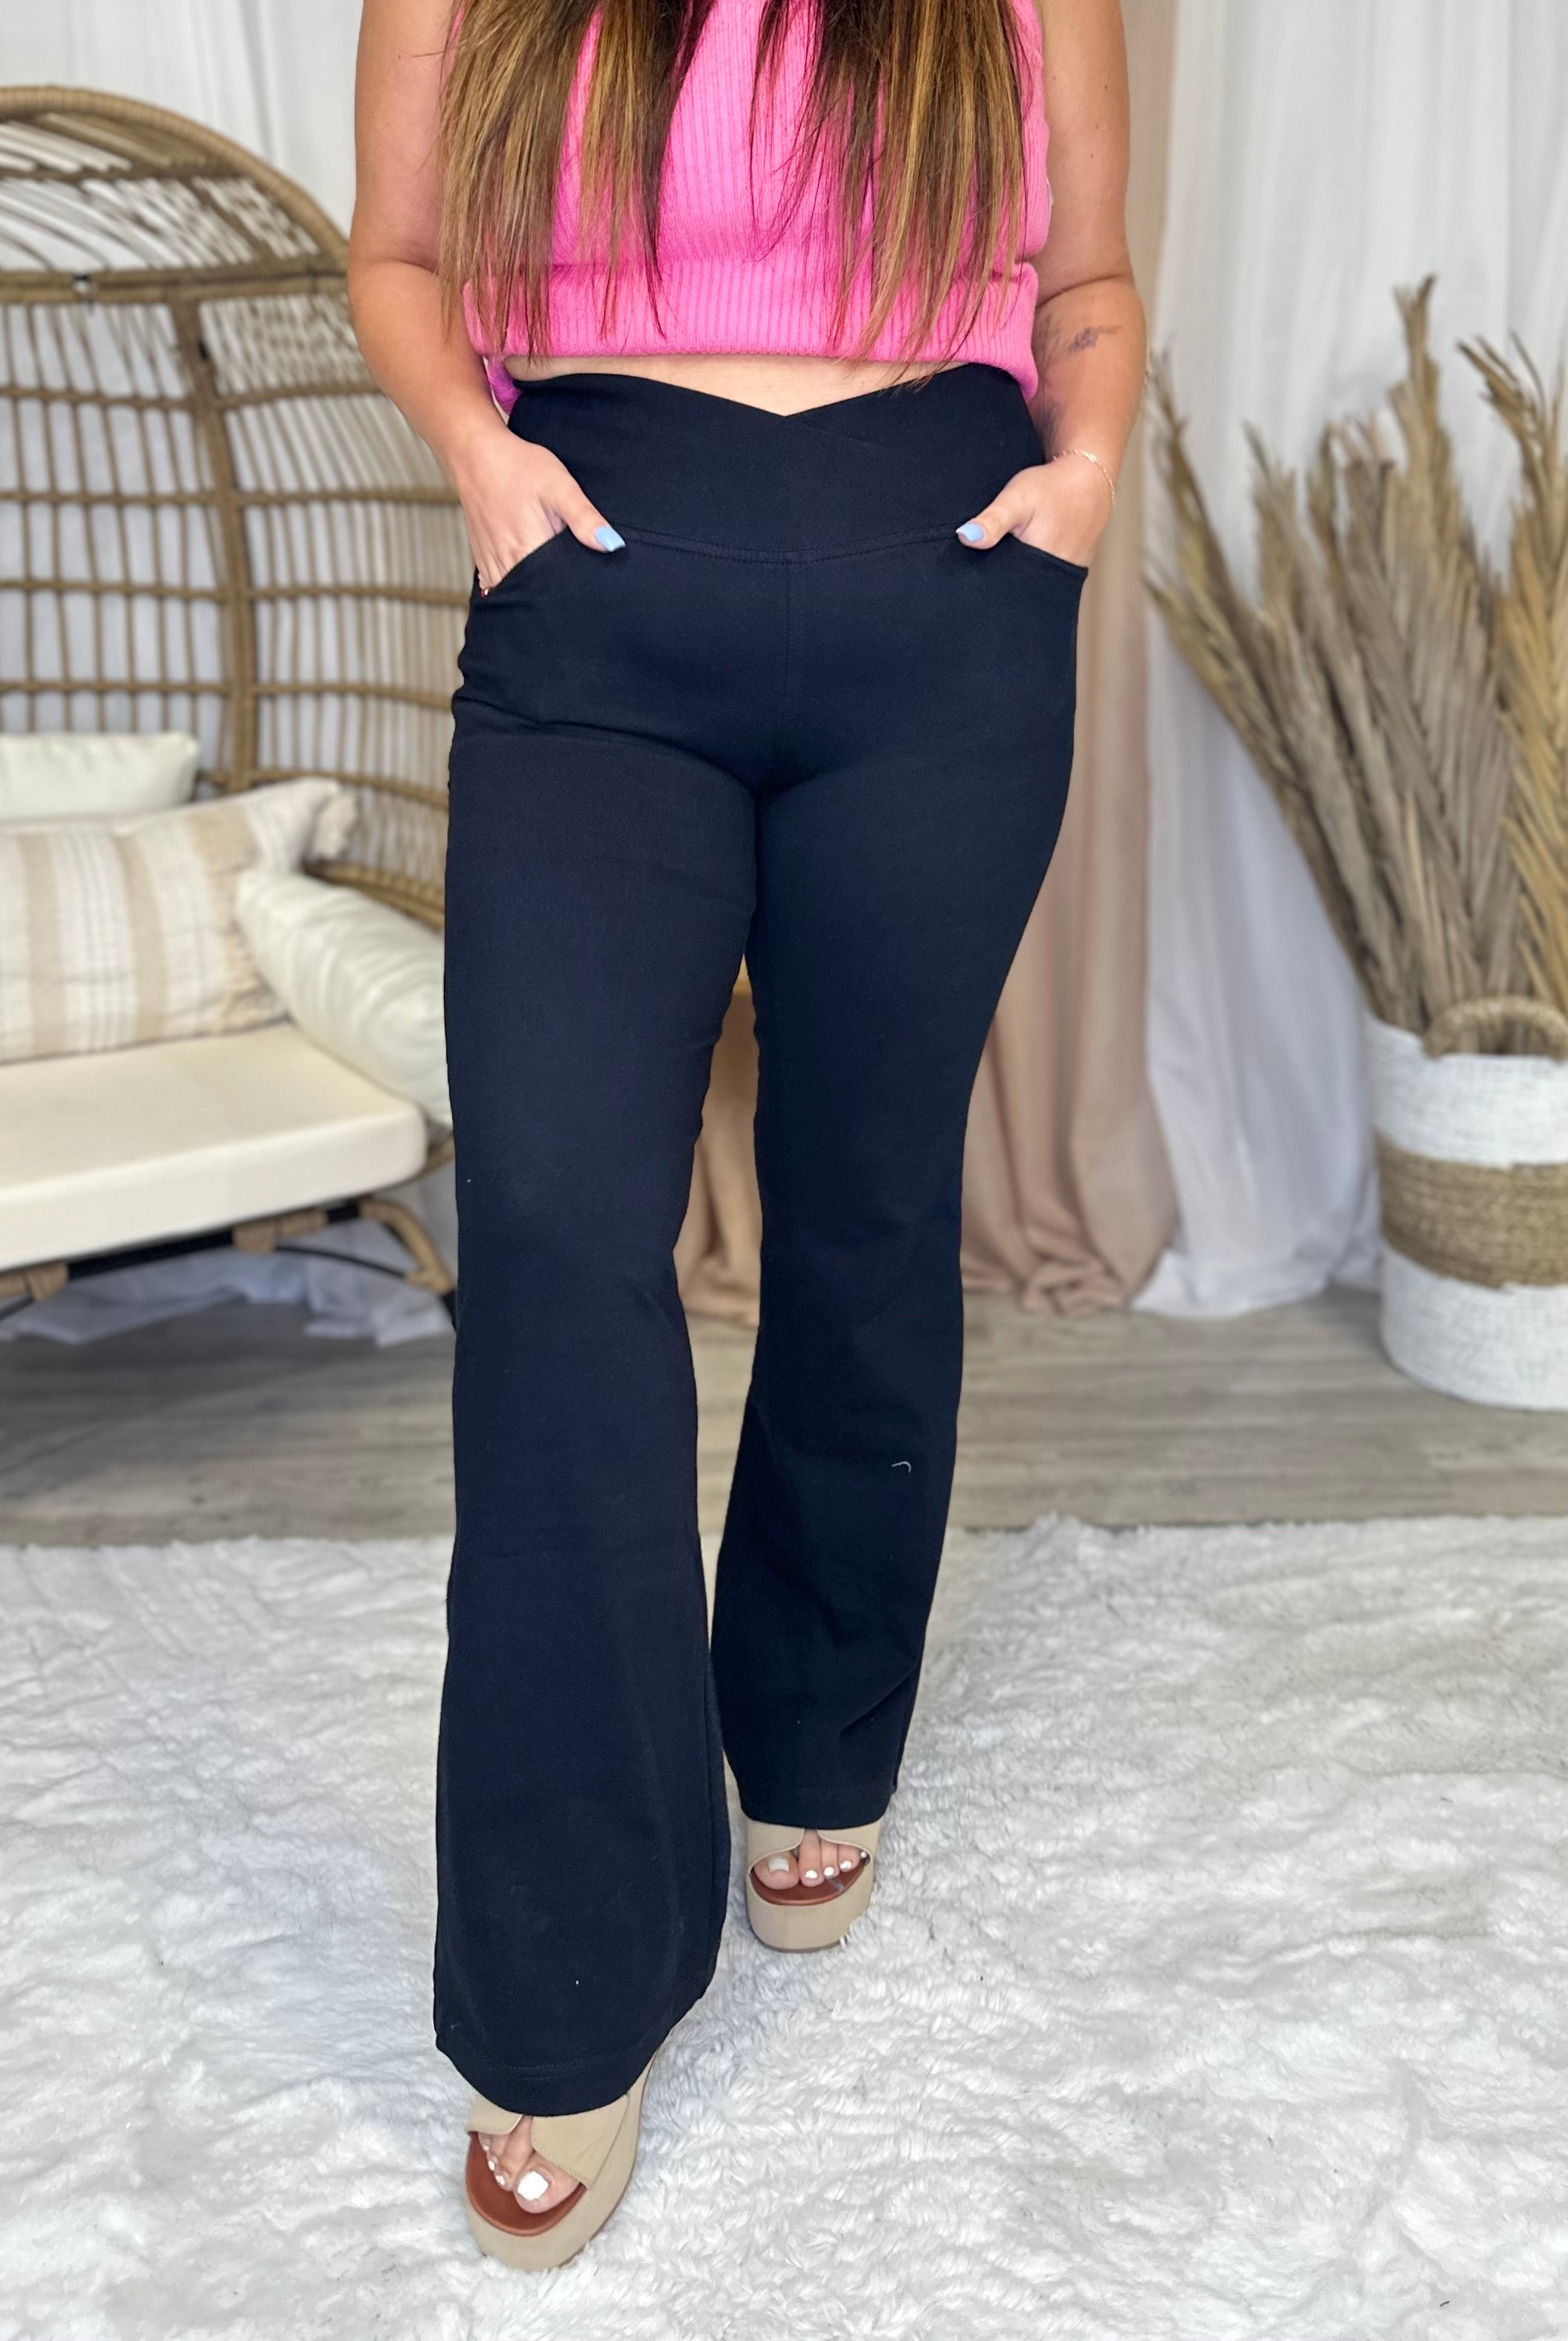 RESTOCK: "V" Waist Yoga Jeggings-150 PANTS-Rae Mode-Heathered Boho Boutique, Women's Fashion and Accessories in Palmetto, FL